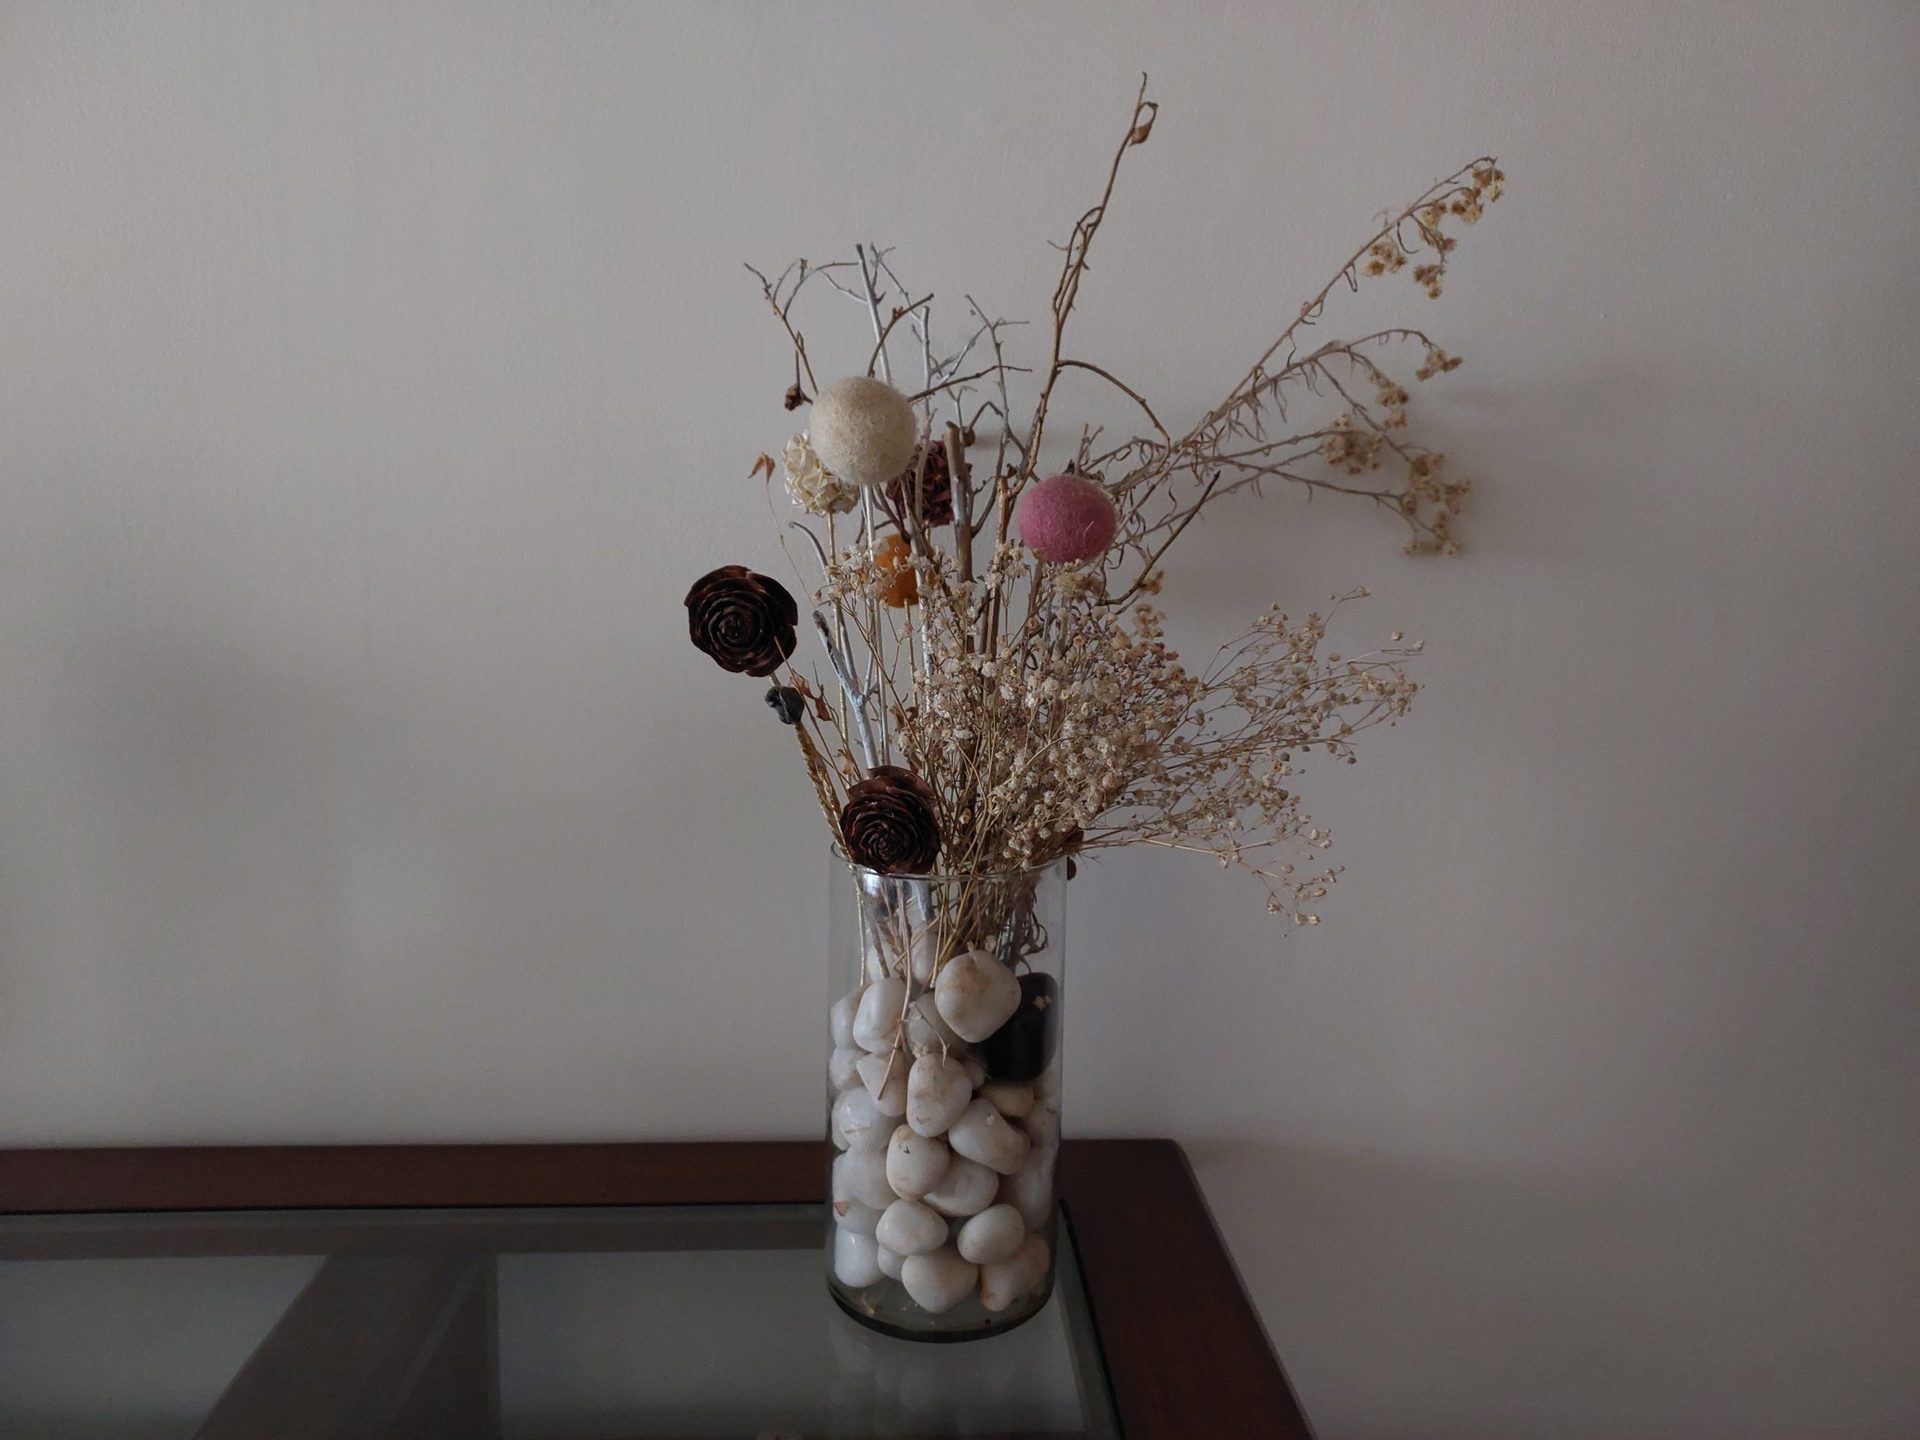 Samsung Galaxy M52 camera sample indoor shot of flowers and pebbles in a glass vase.